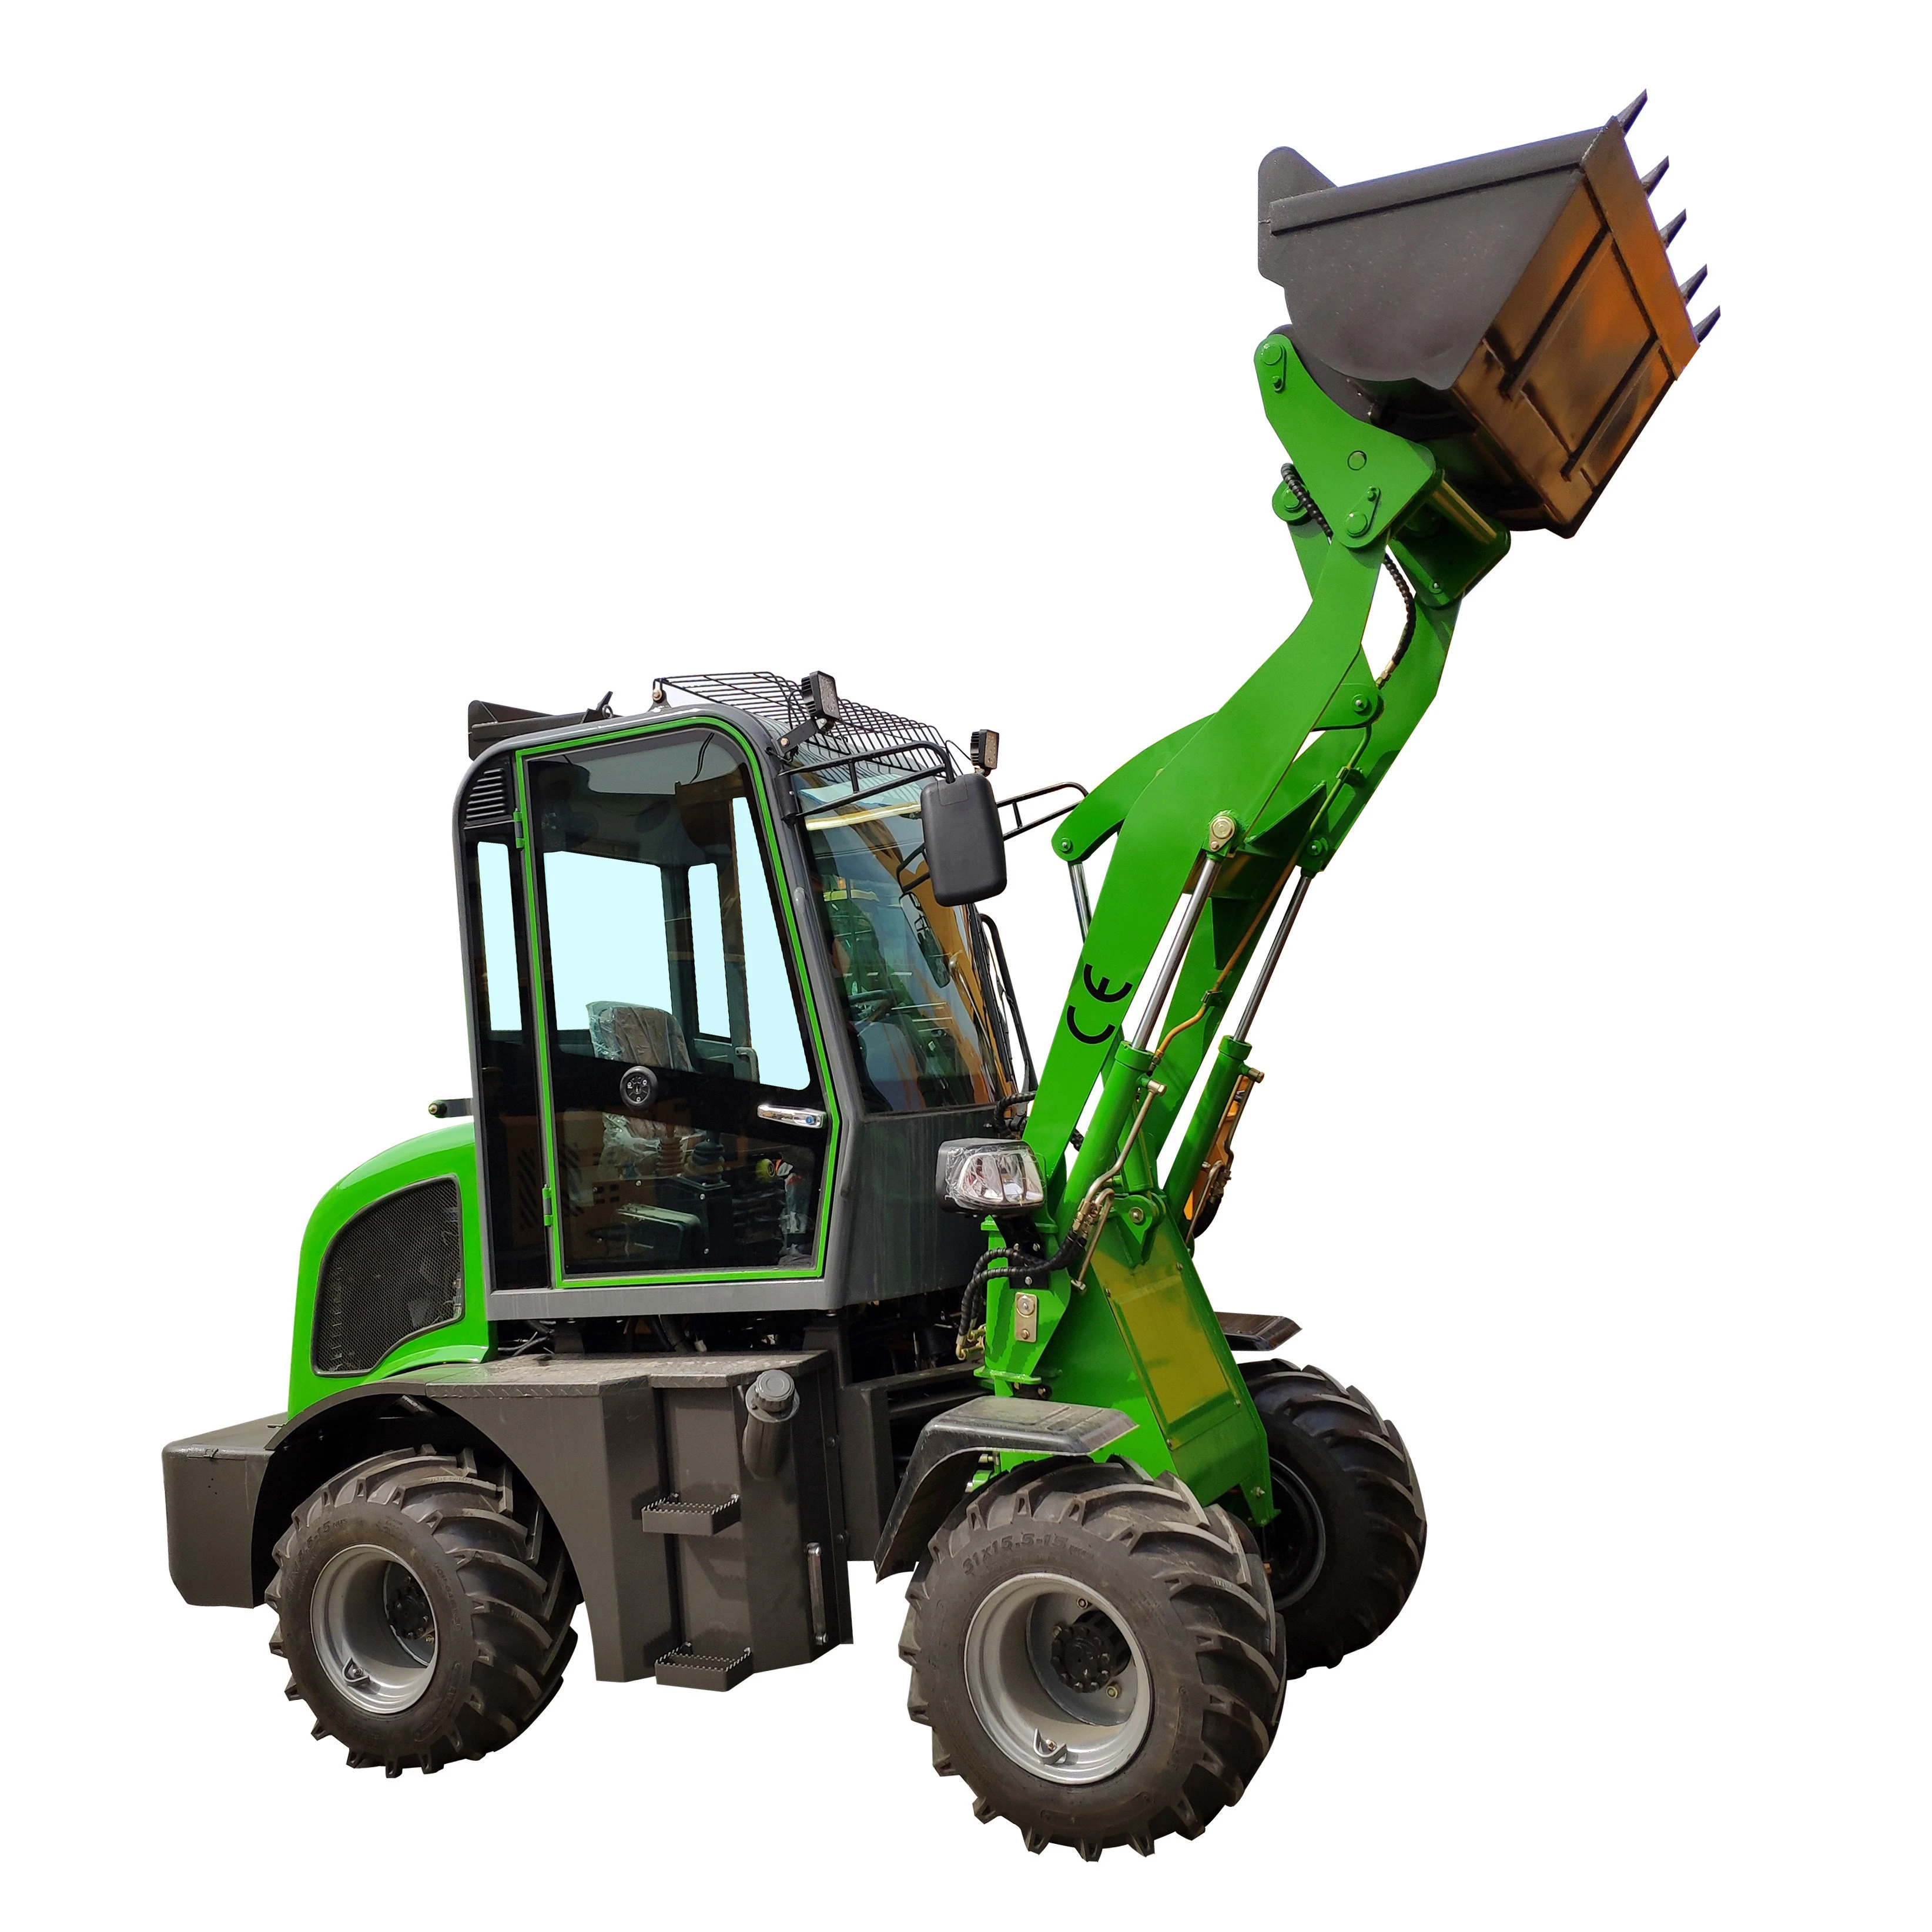 New technology telescopic loader engineering construction machinery loader front end loader mini